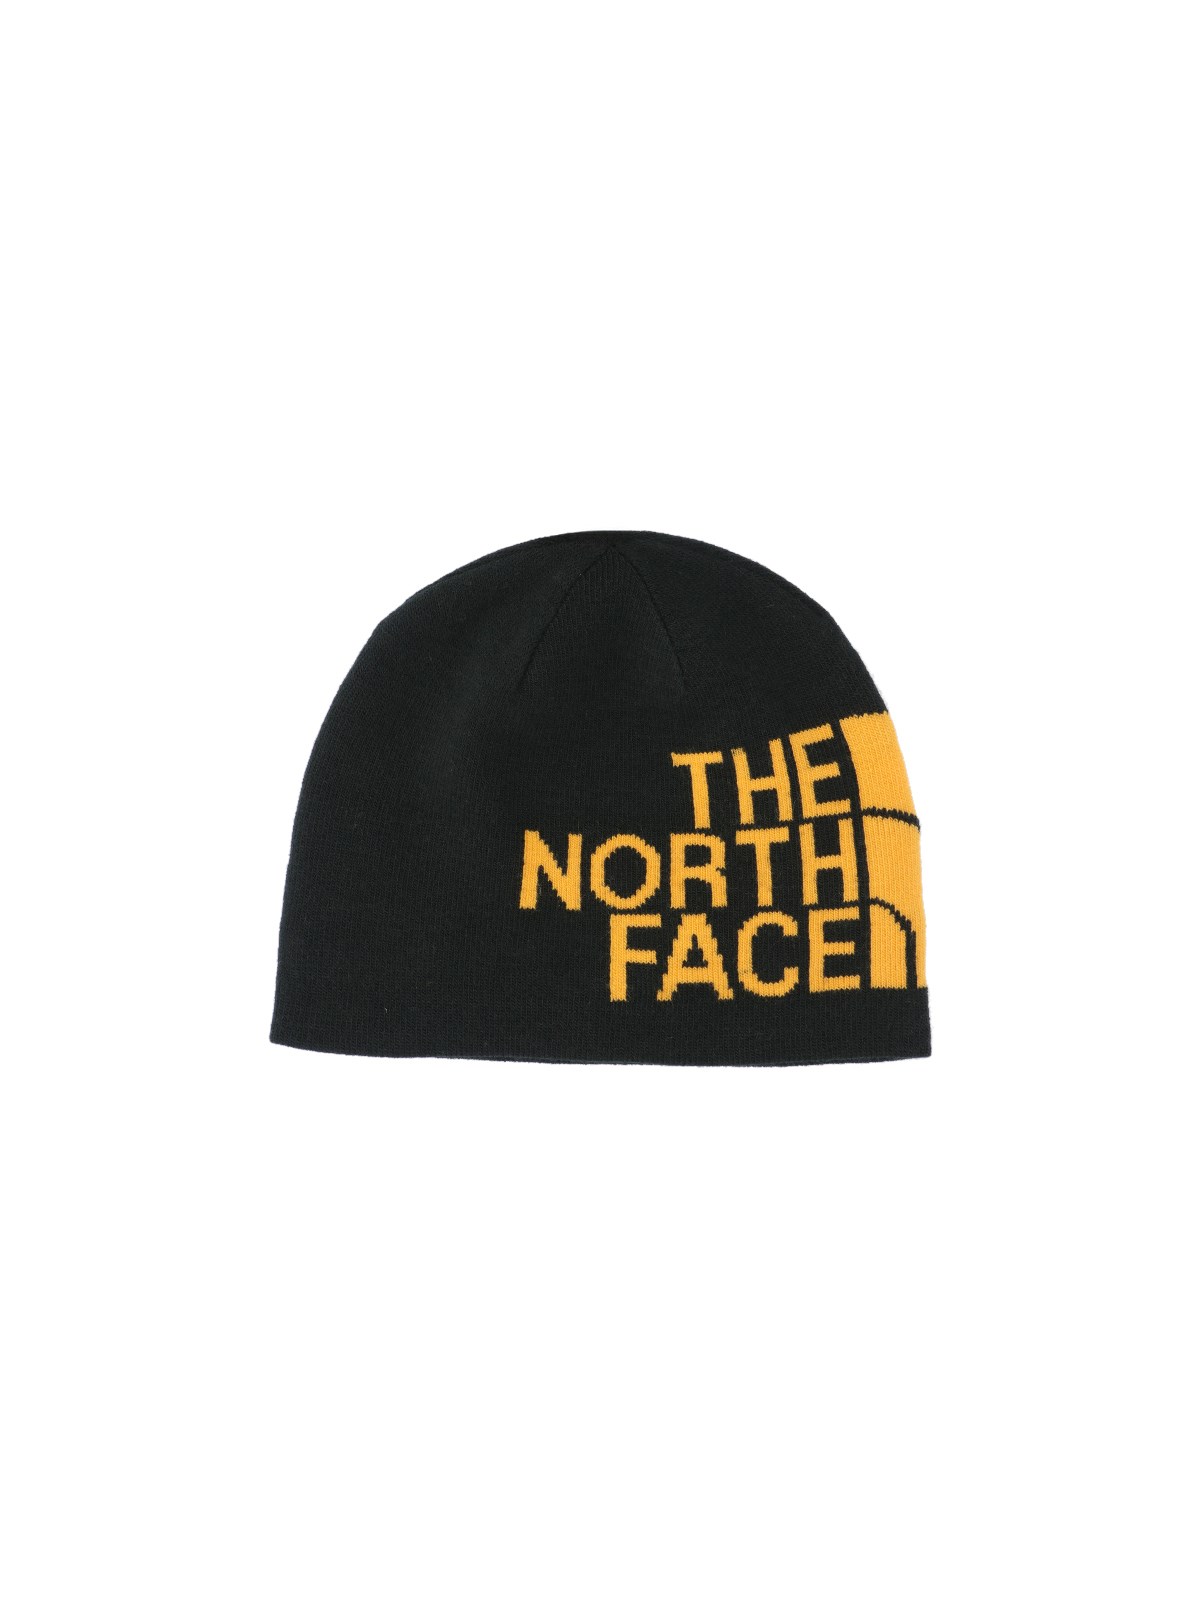 The North Face Reversible Banner Beanie Hat In Black  